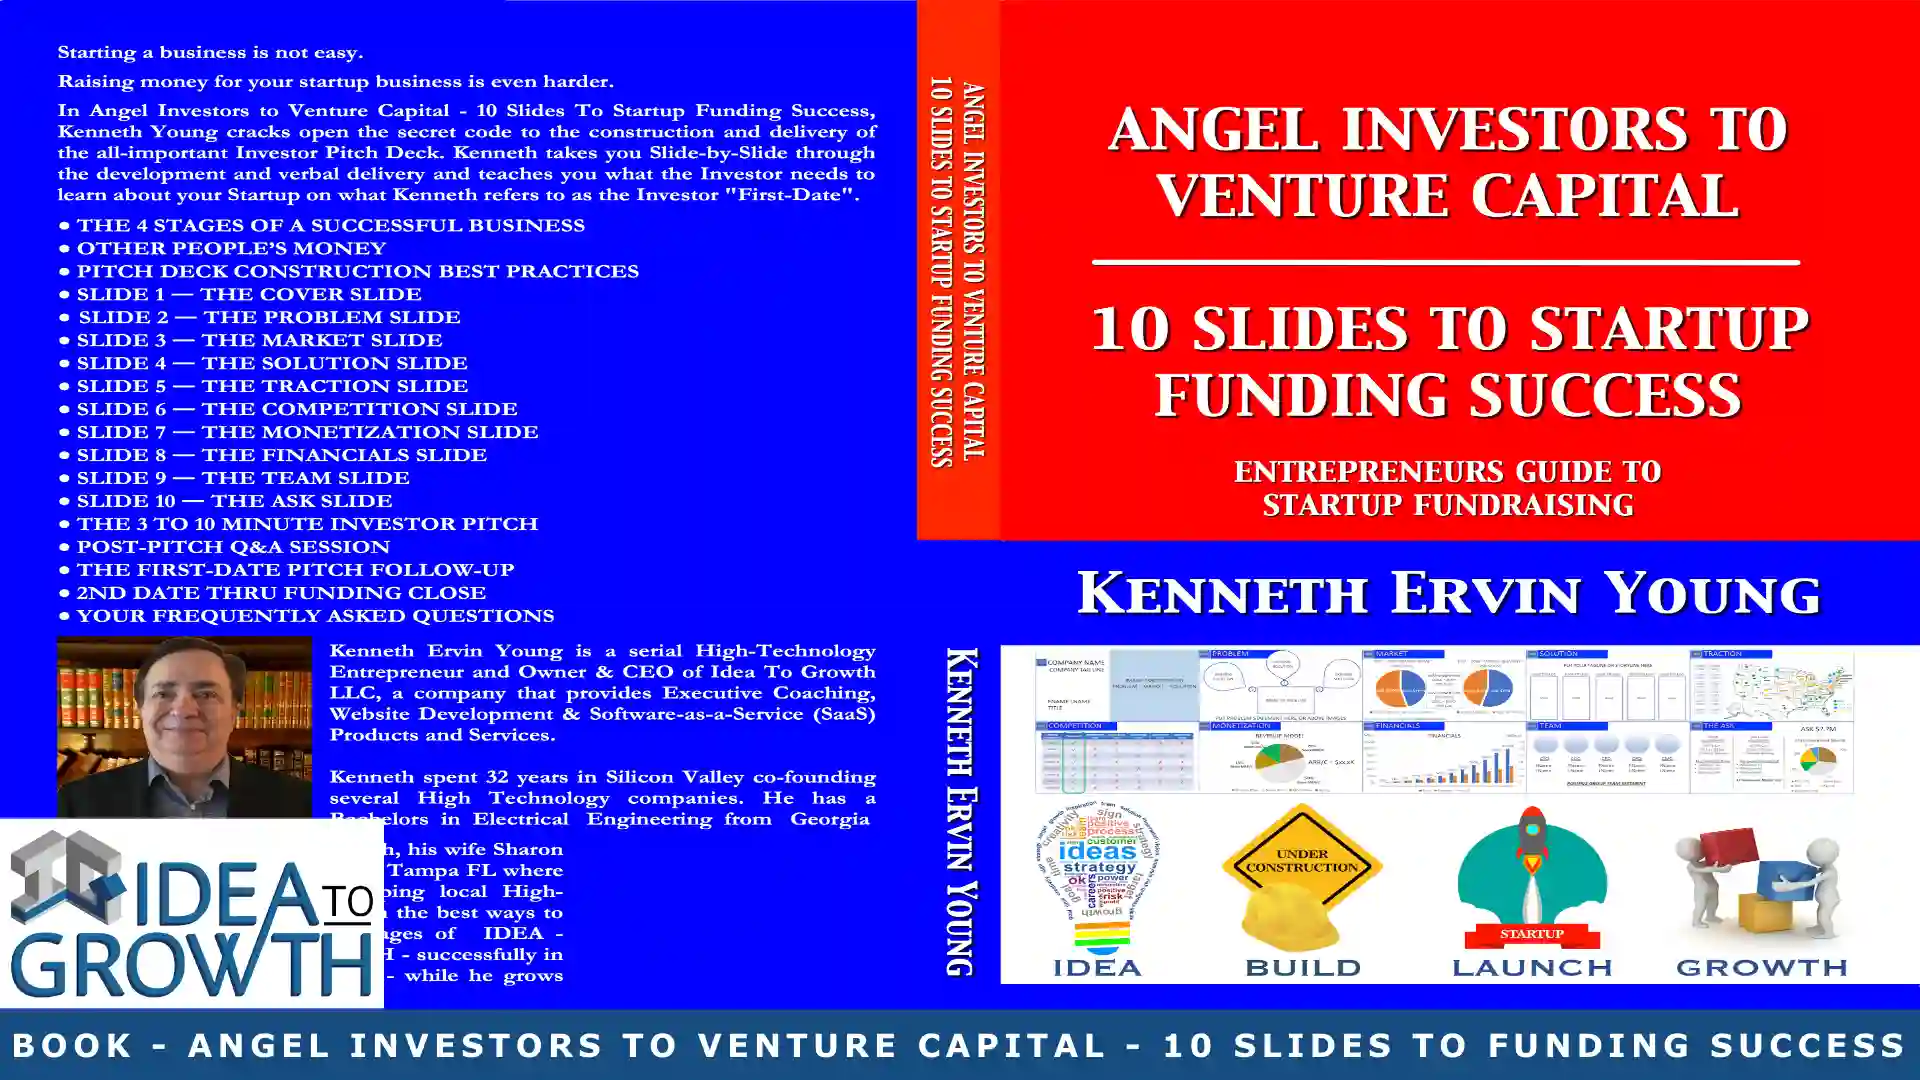 BOOK - ANGEL INVESTORS TO VENTURE CAPITAL - 10 SLIDES TO FUNDING SUCCESS